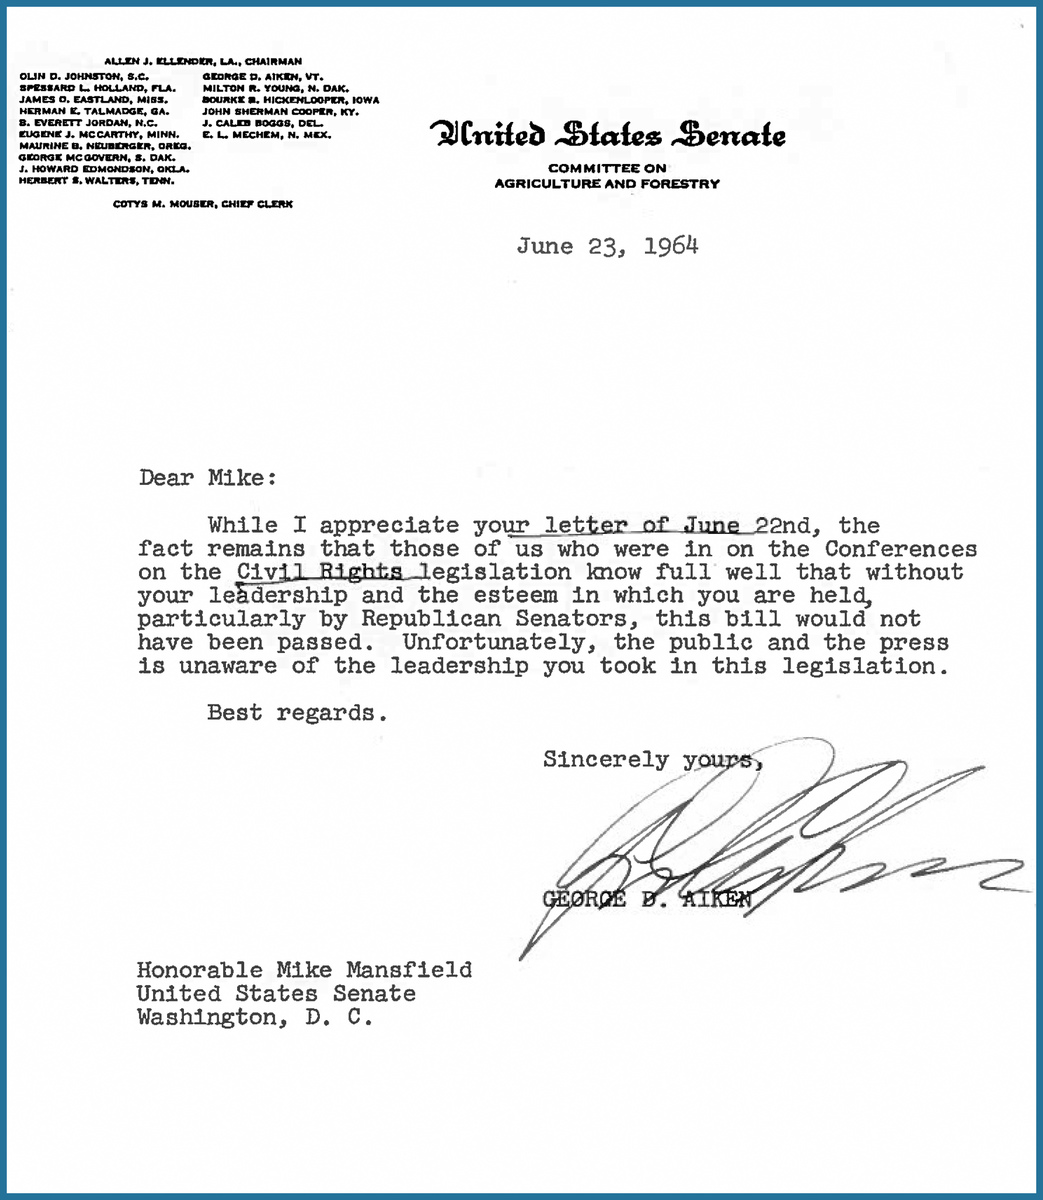 Senator George Aiken's letter about the Civil Rights Act